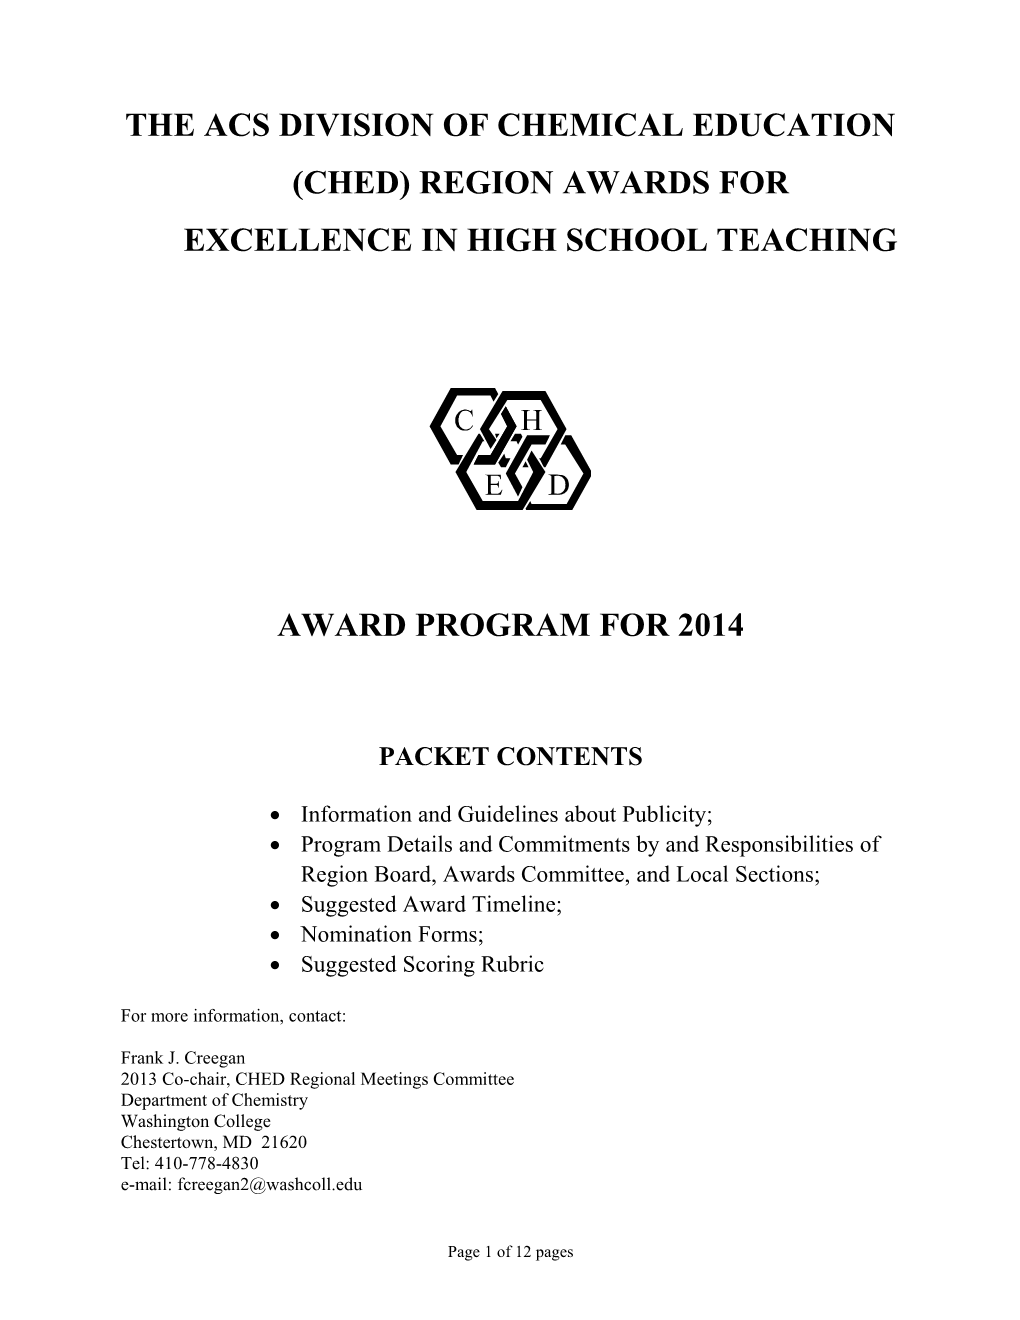 THE ACS DIVISION of CHEMICAL EDUCATION Name of Region REGION AWARD for EXCELLENCE in HIGH